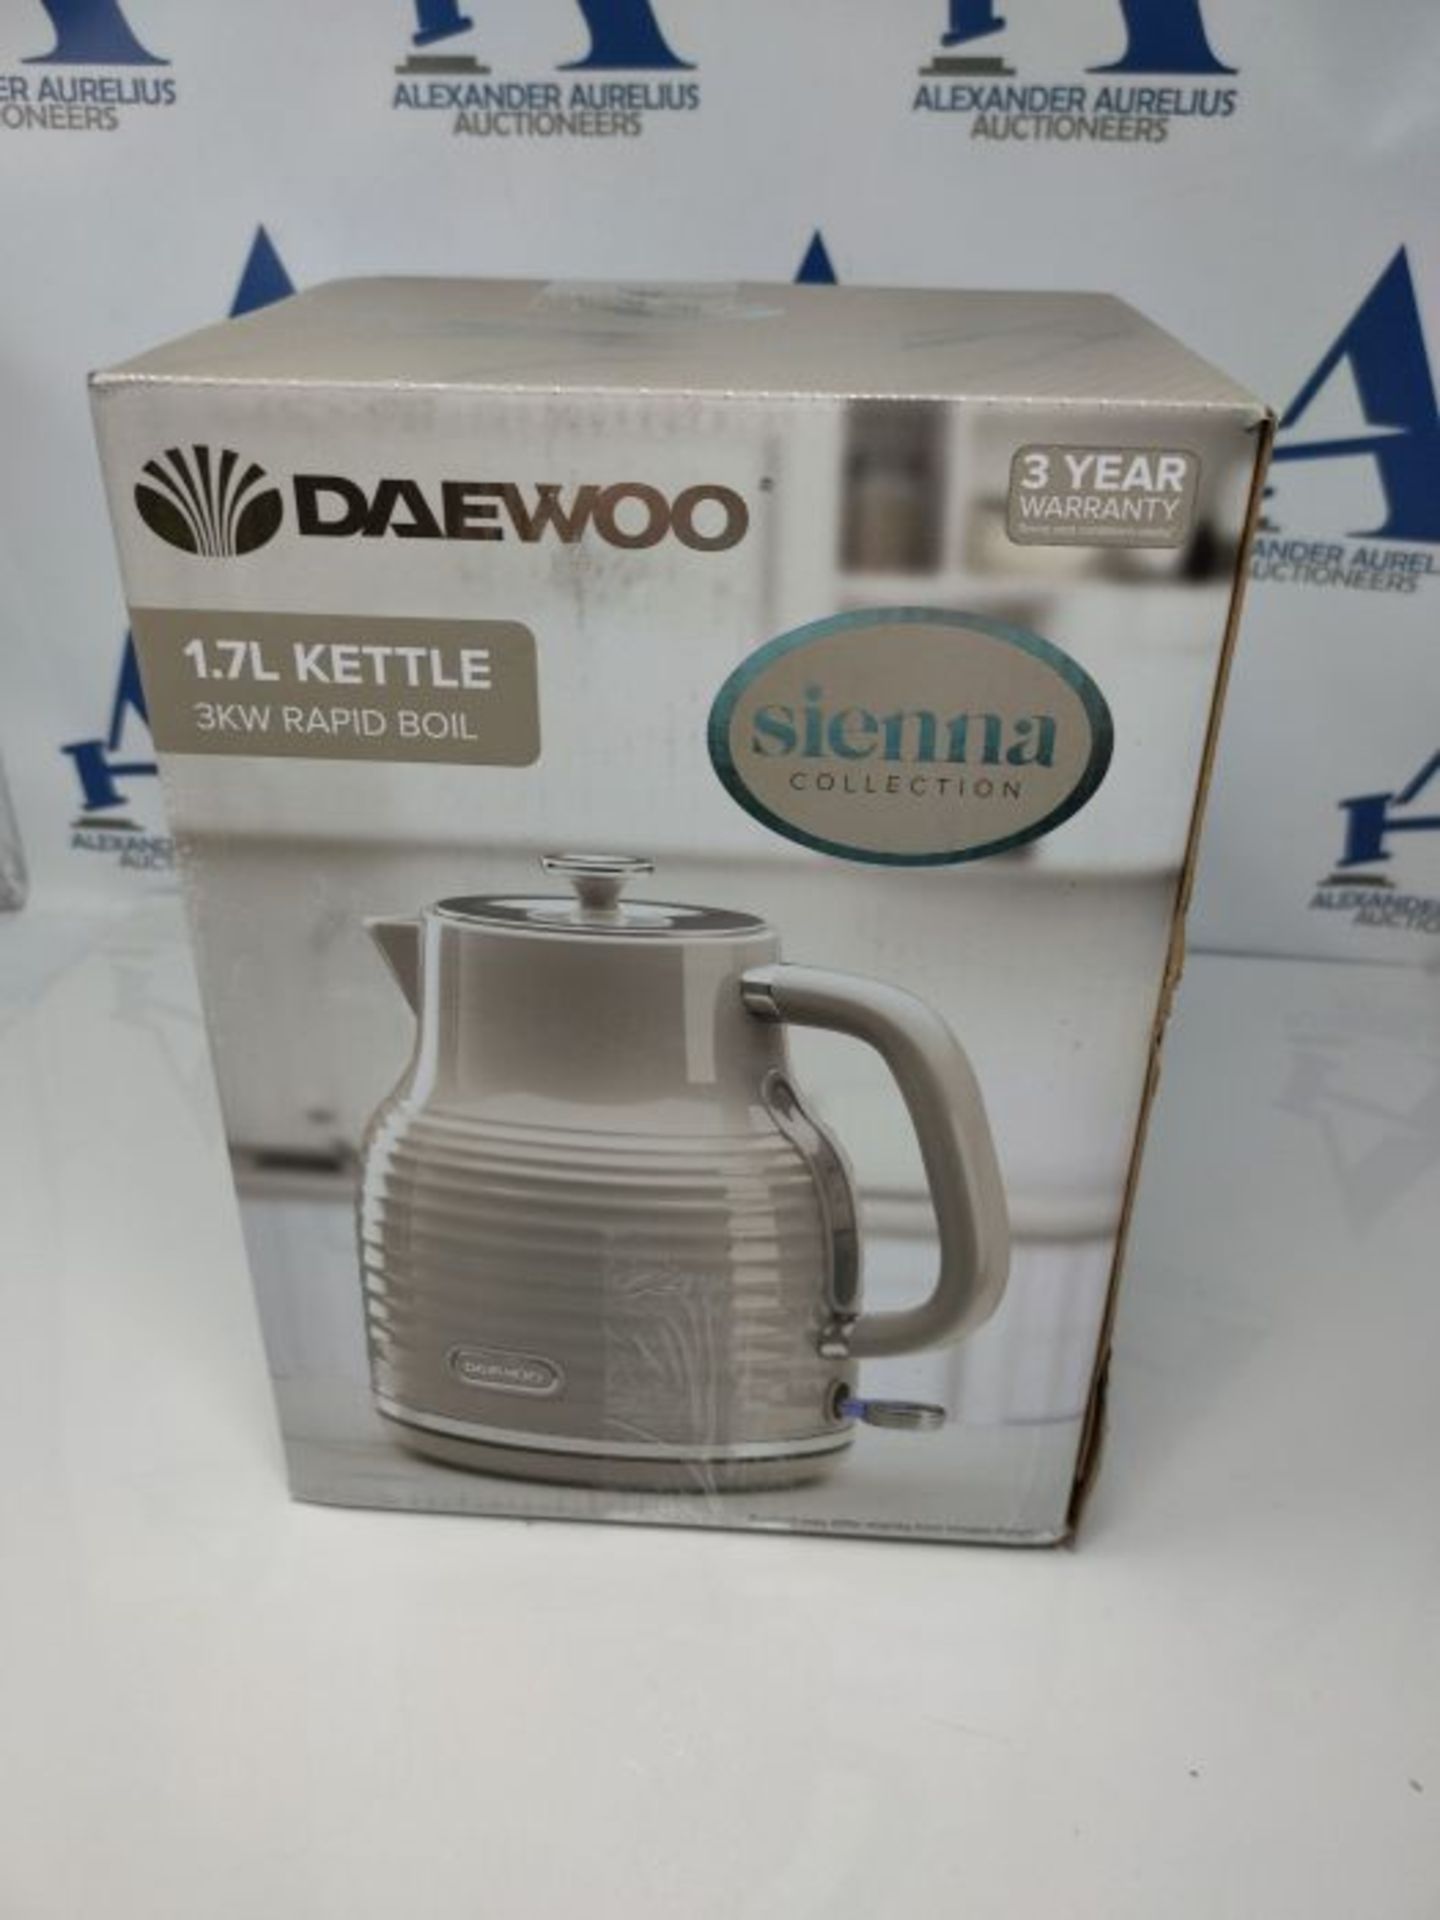 Daewoo Sienna Collection Jug Kettle, Family Sized 1.7 Litre Capacity, Fast Boil, Easy - Image 2 of 3